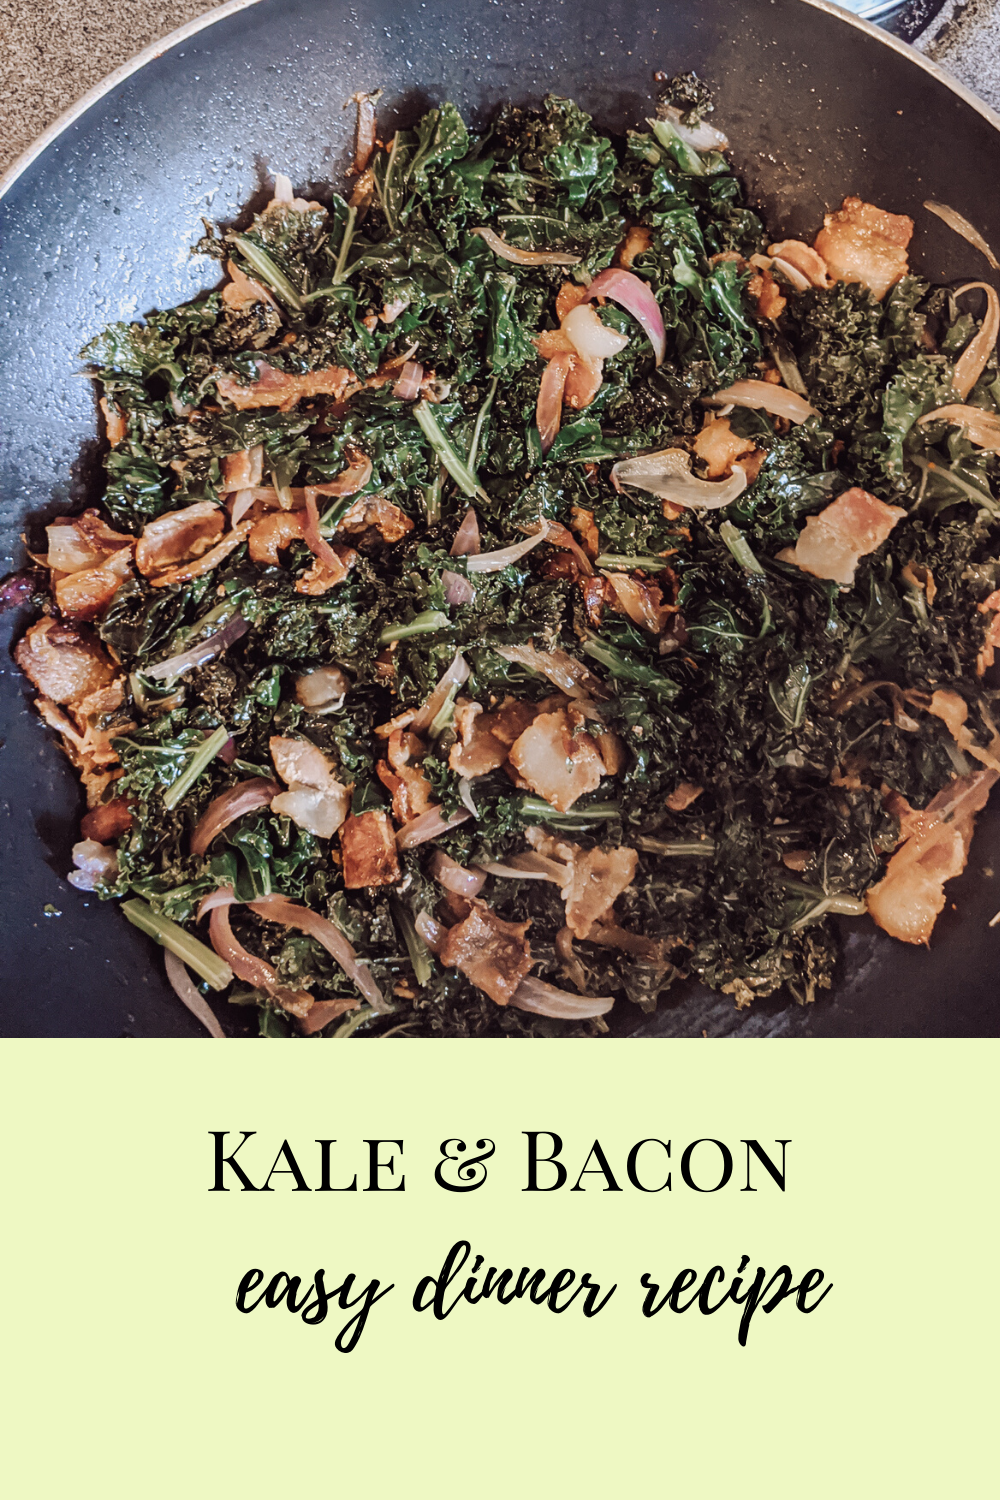 Try This Quick and Easy Five Ingredient Kale & Bacon Recipe